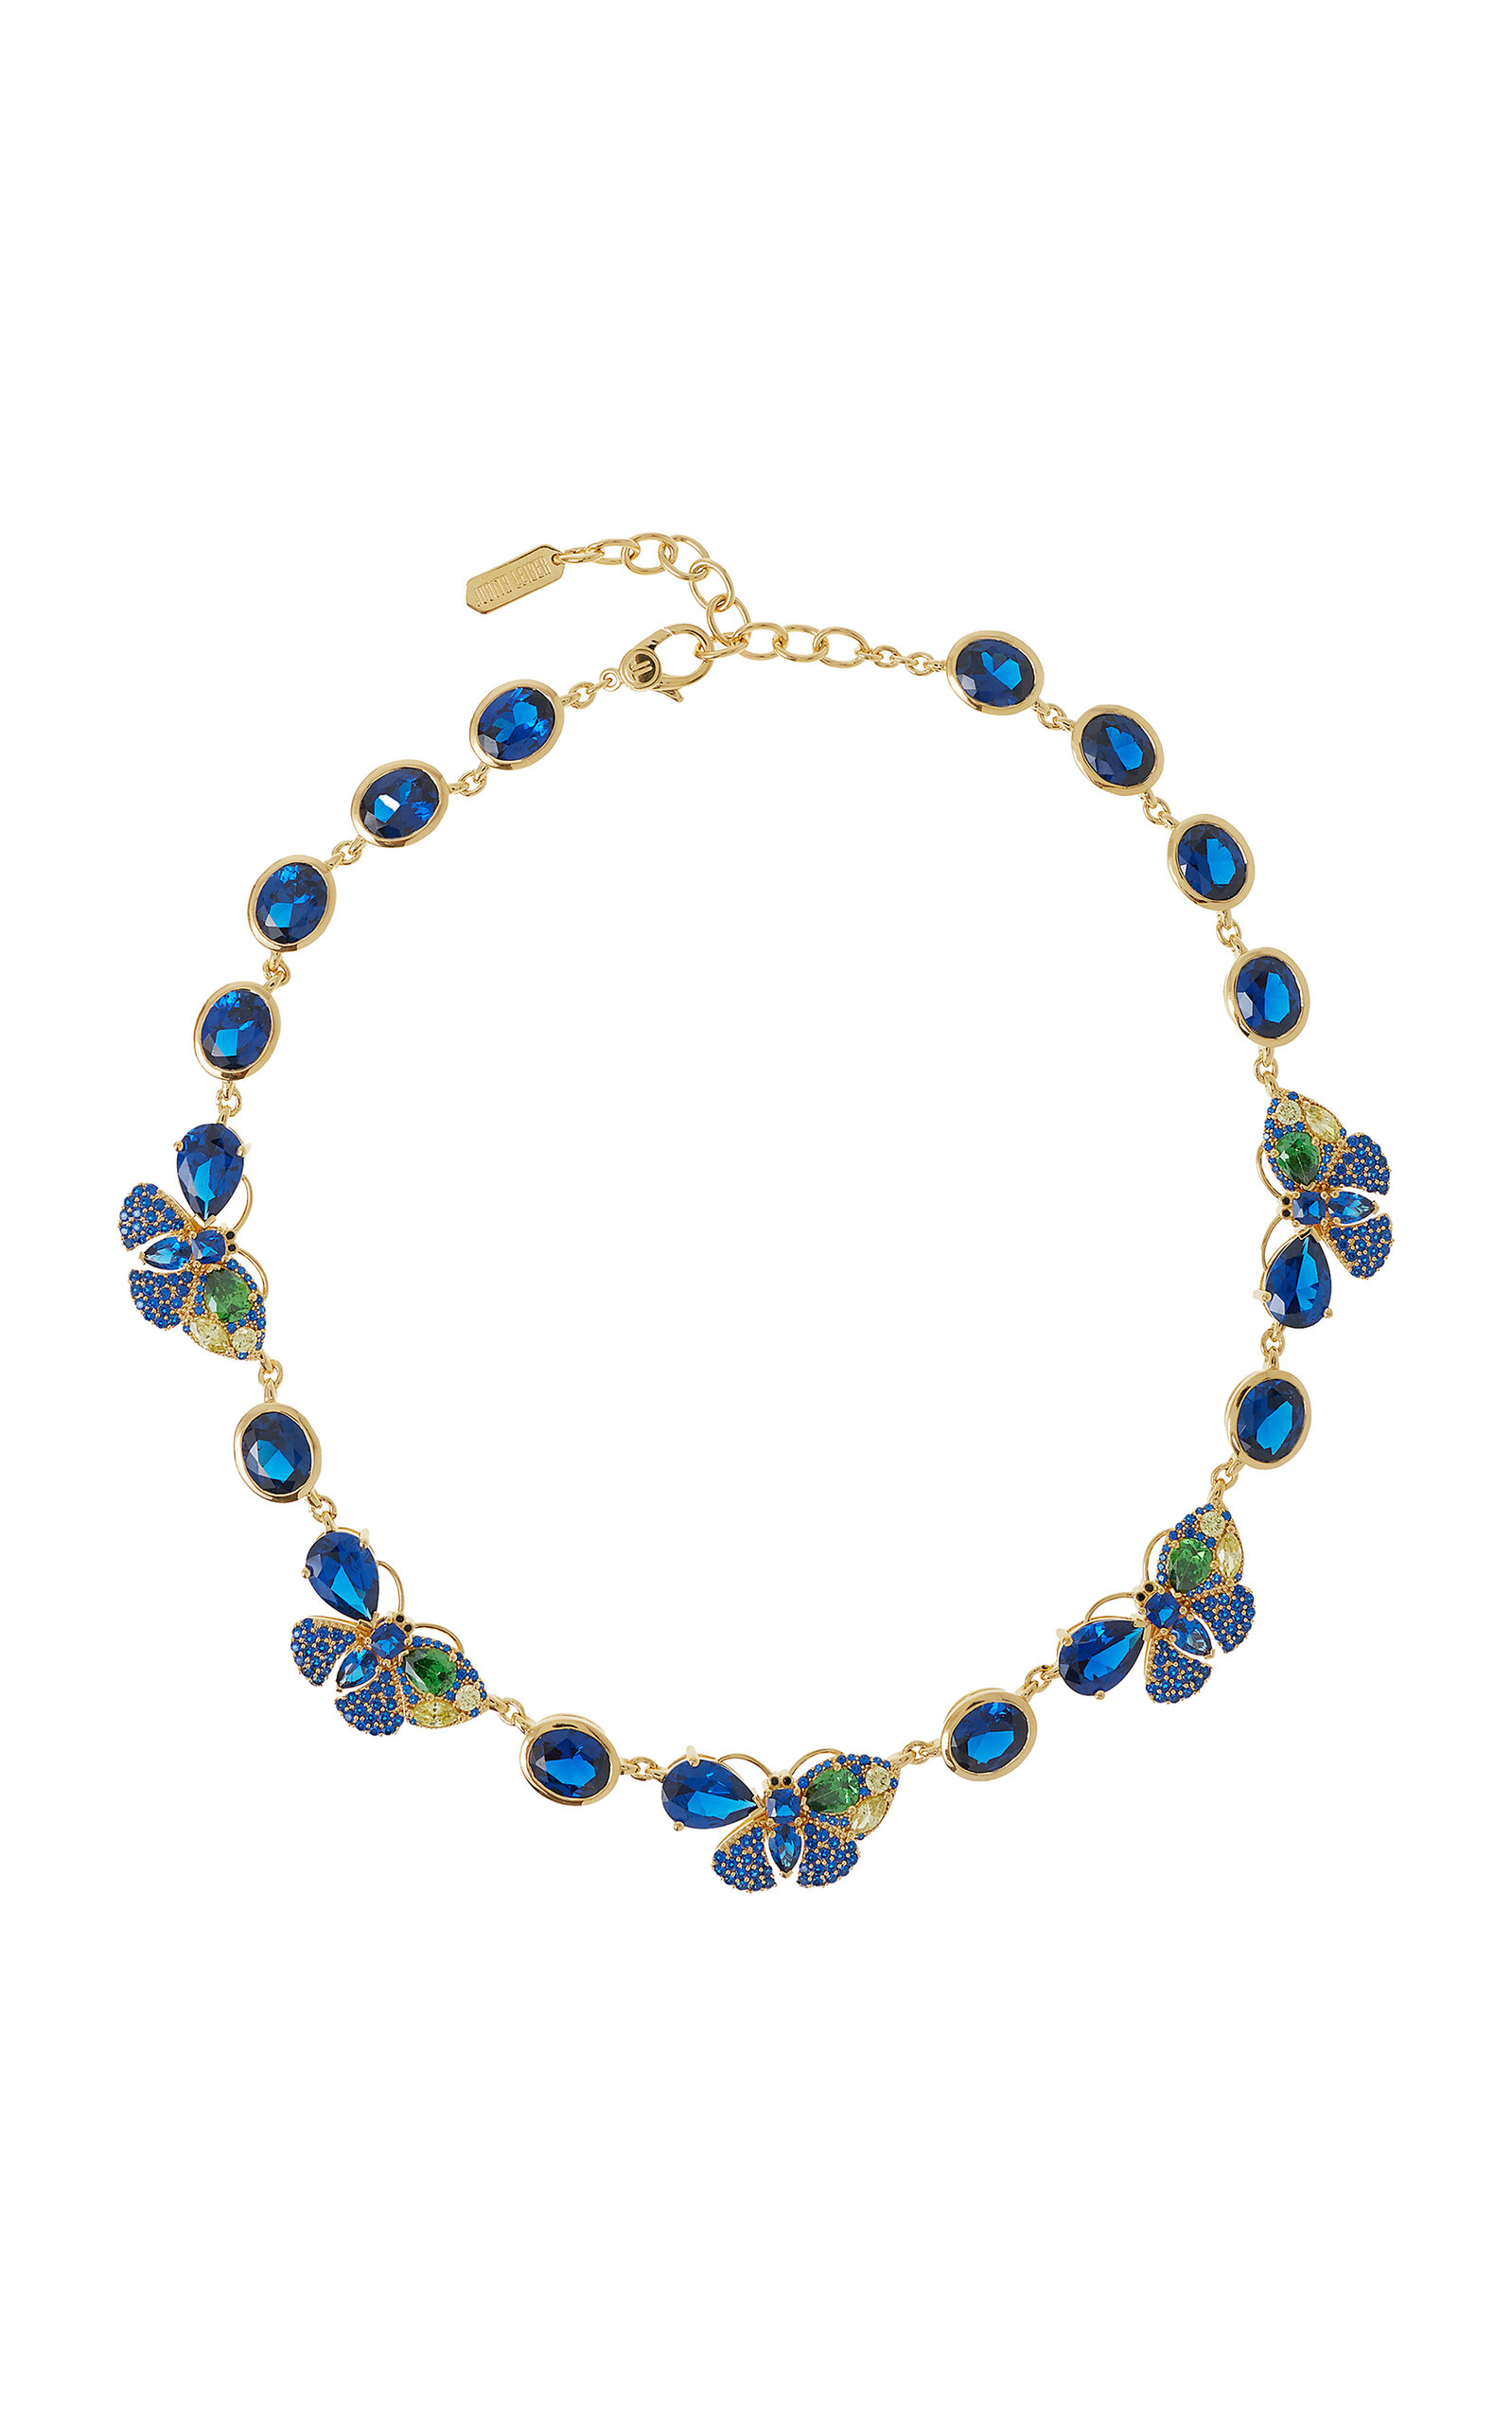 Judith Leiber Butterfly Gem 14k Gold-plated Necklace In Blue